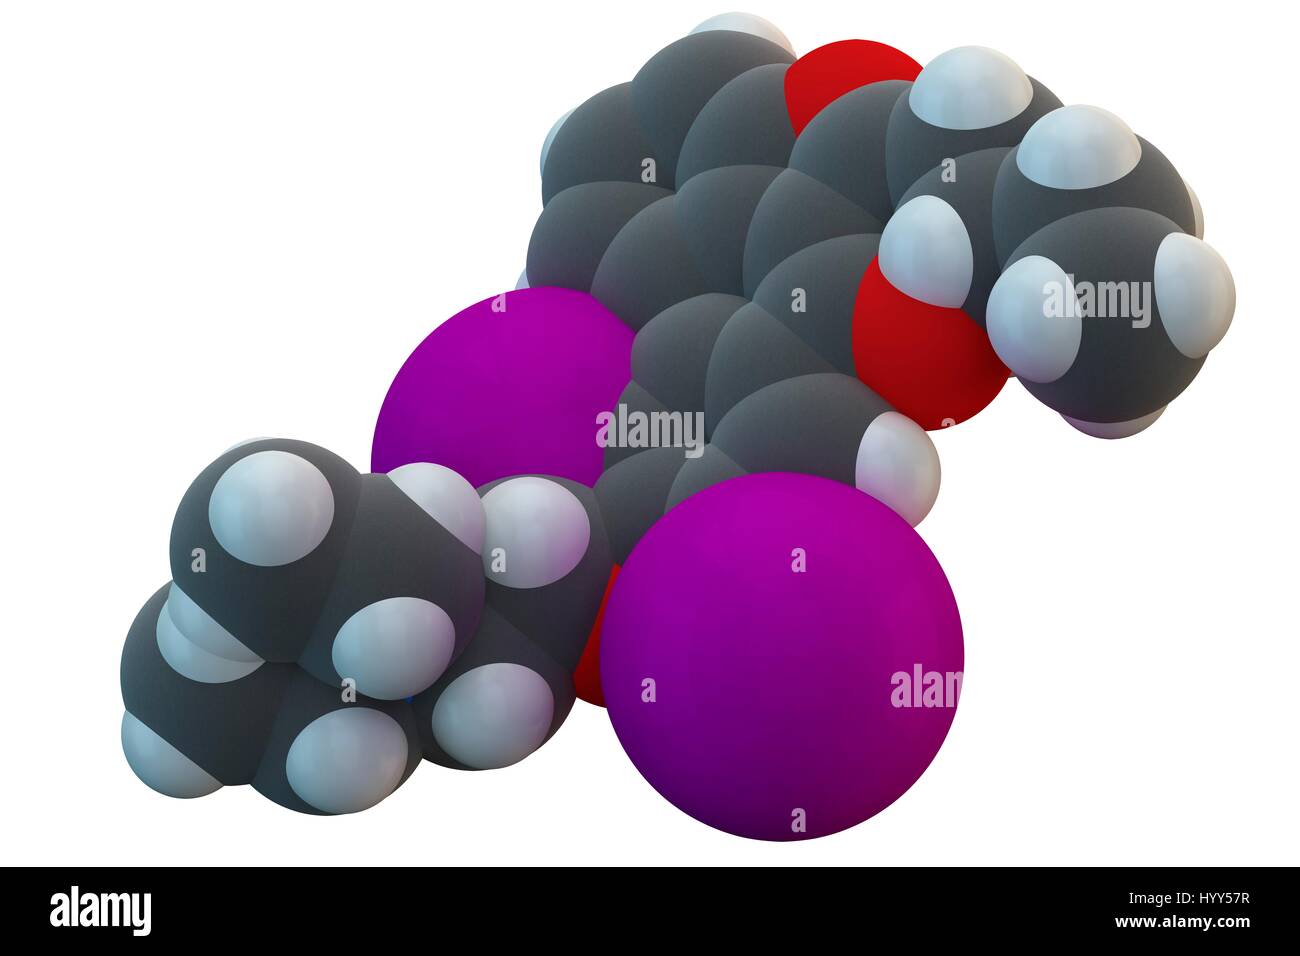 Amiodarone antiarrhythmic drug molecule. Chemical formula is C25H29I2NO3. Atoms are represented as spheres: carbon (grey), hydrogen (white), nitrogen (blue), oxygen (red). Illustration. Stock Photo